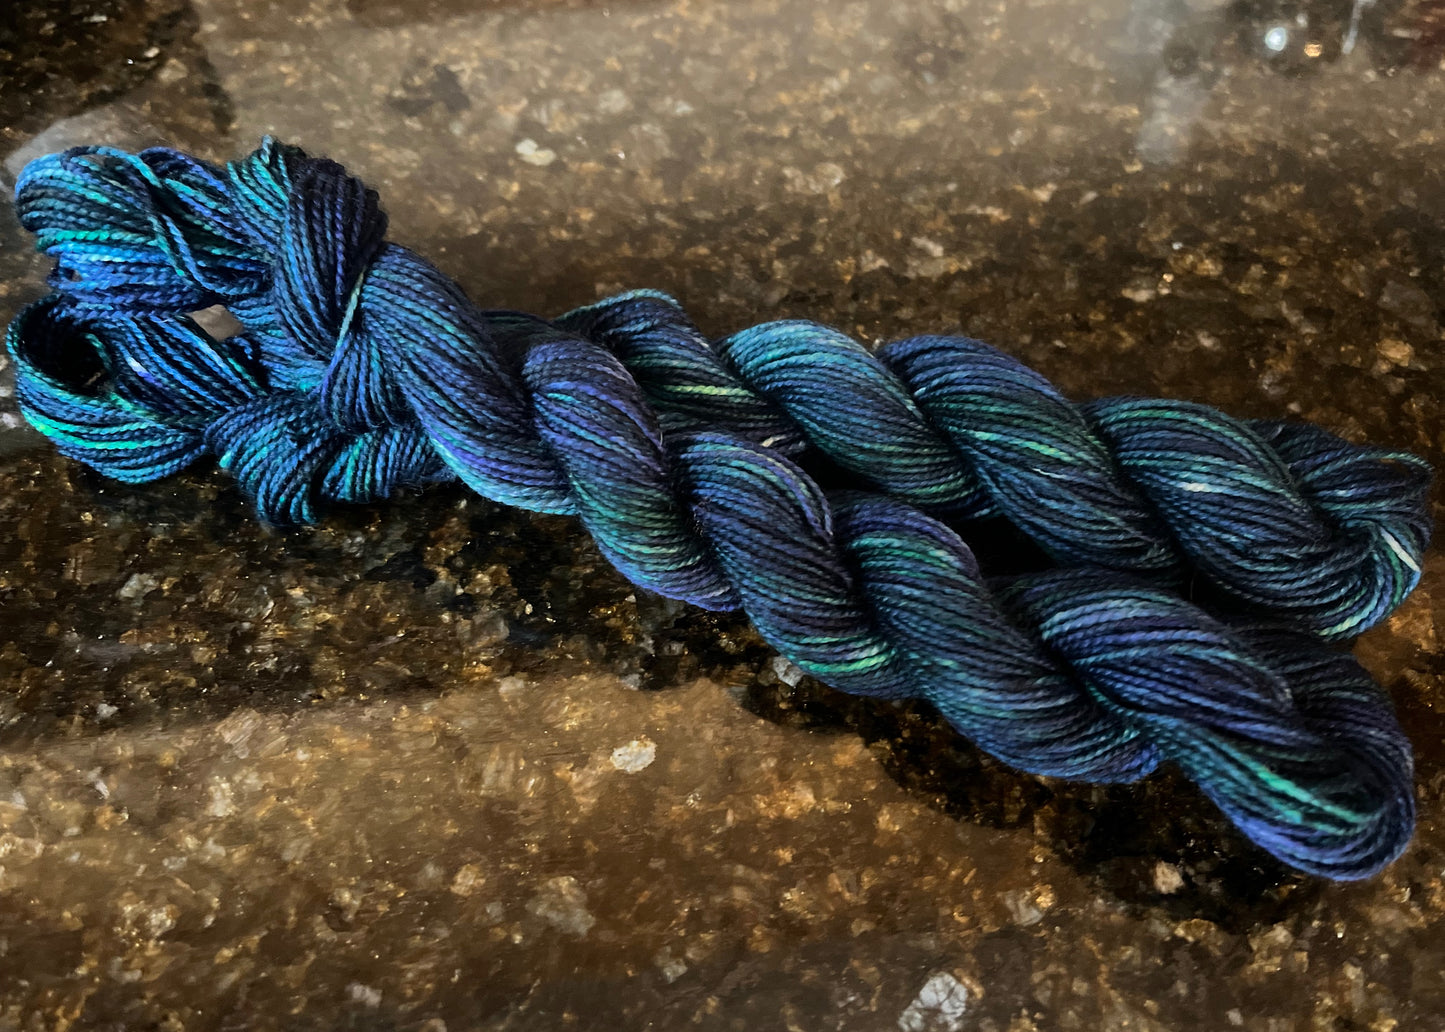 Dyed to order: Peacock